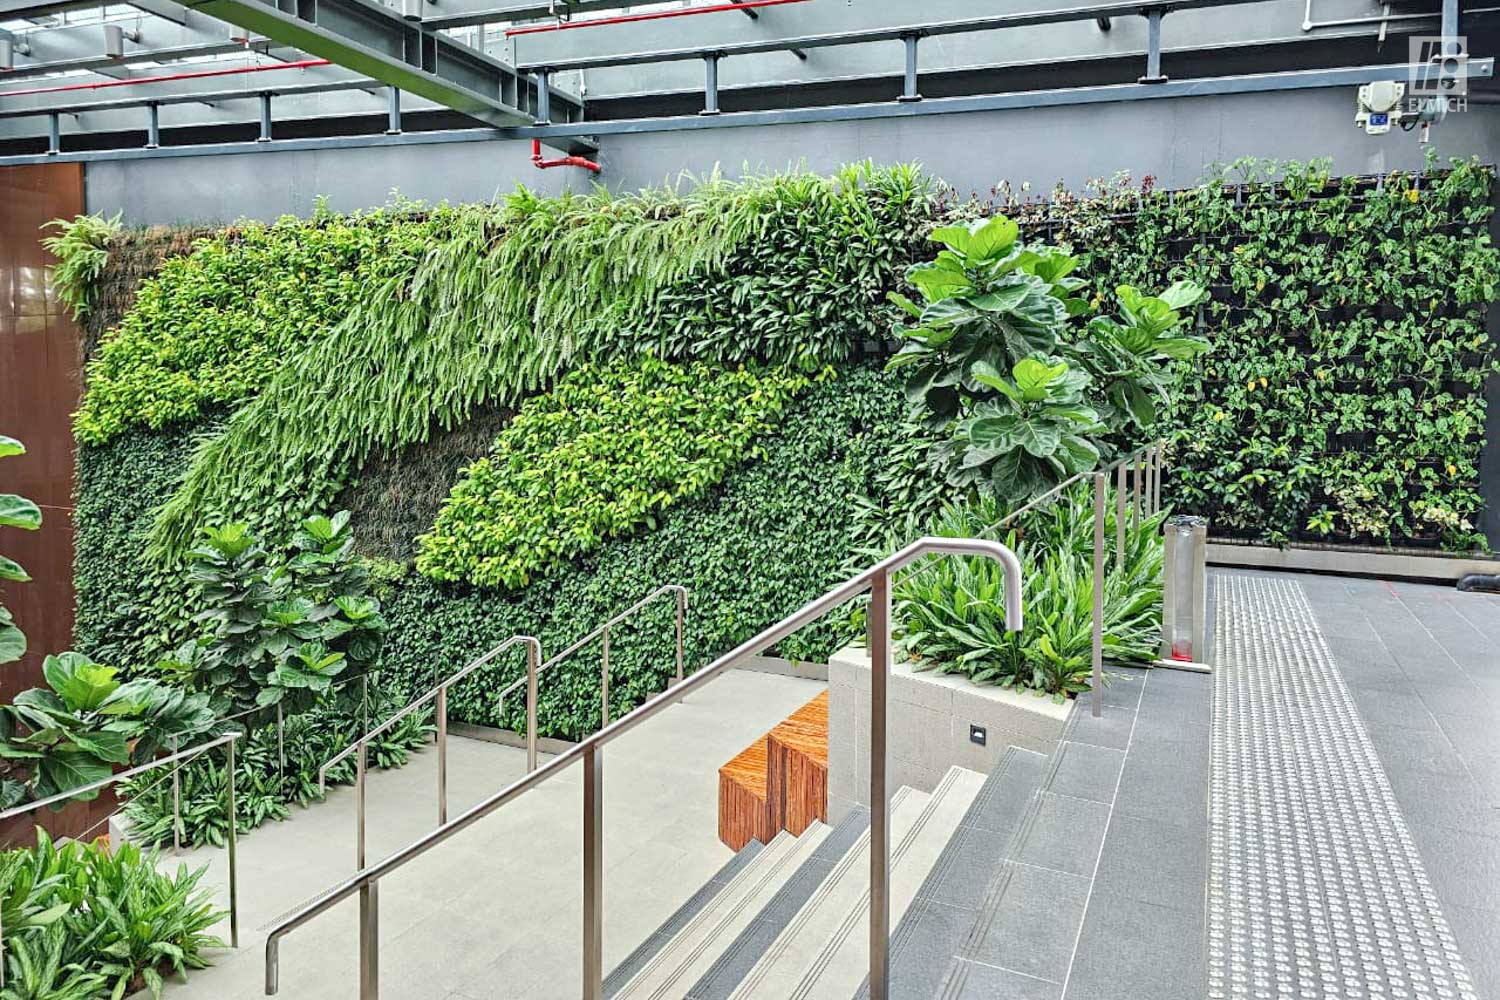 Green Wall beside Staircase